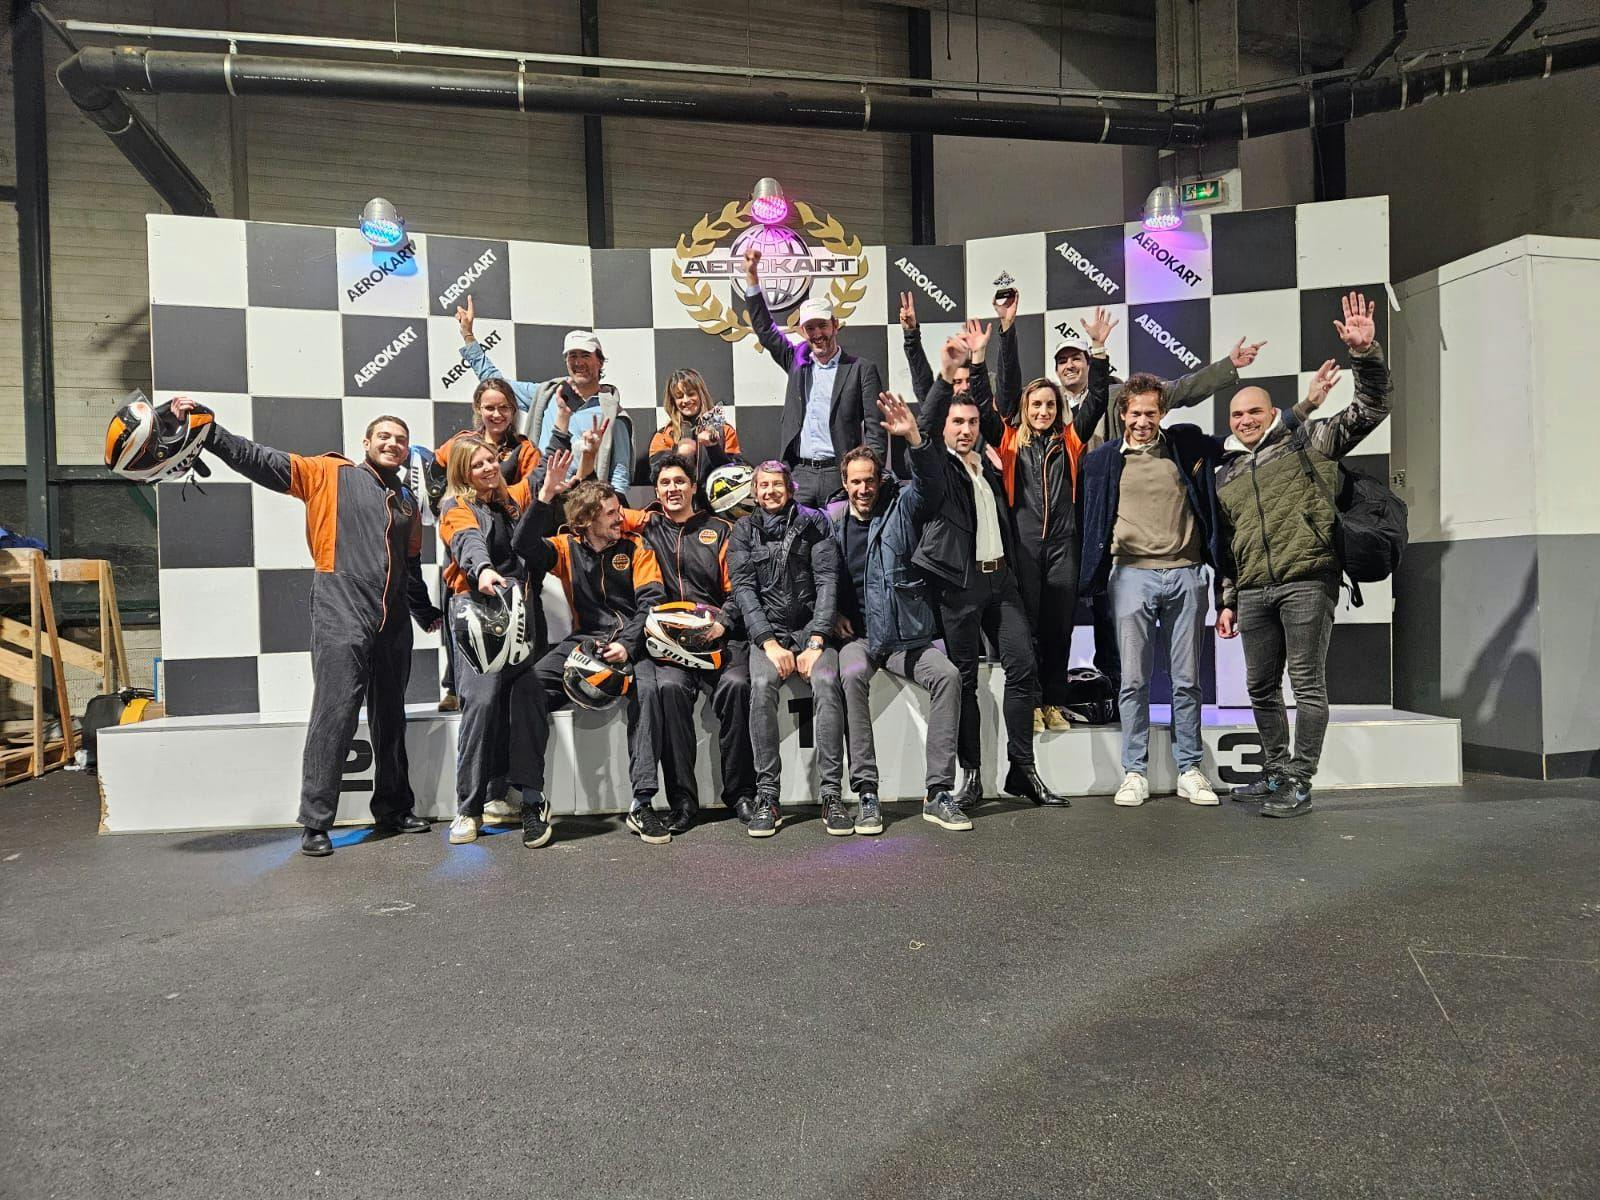 Archinvest organise une intense session de karting 